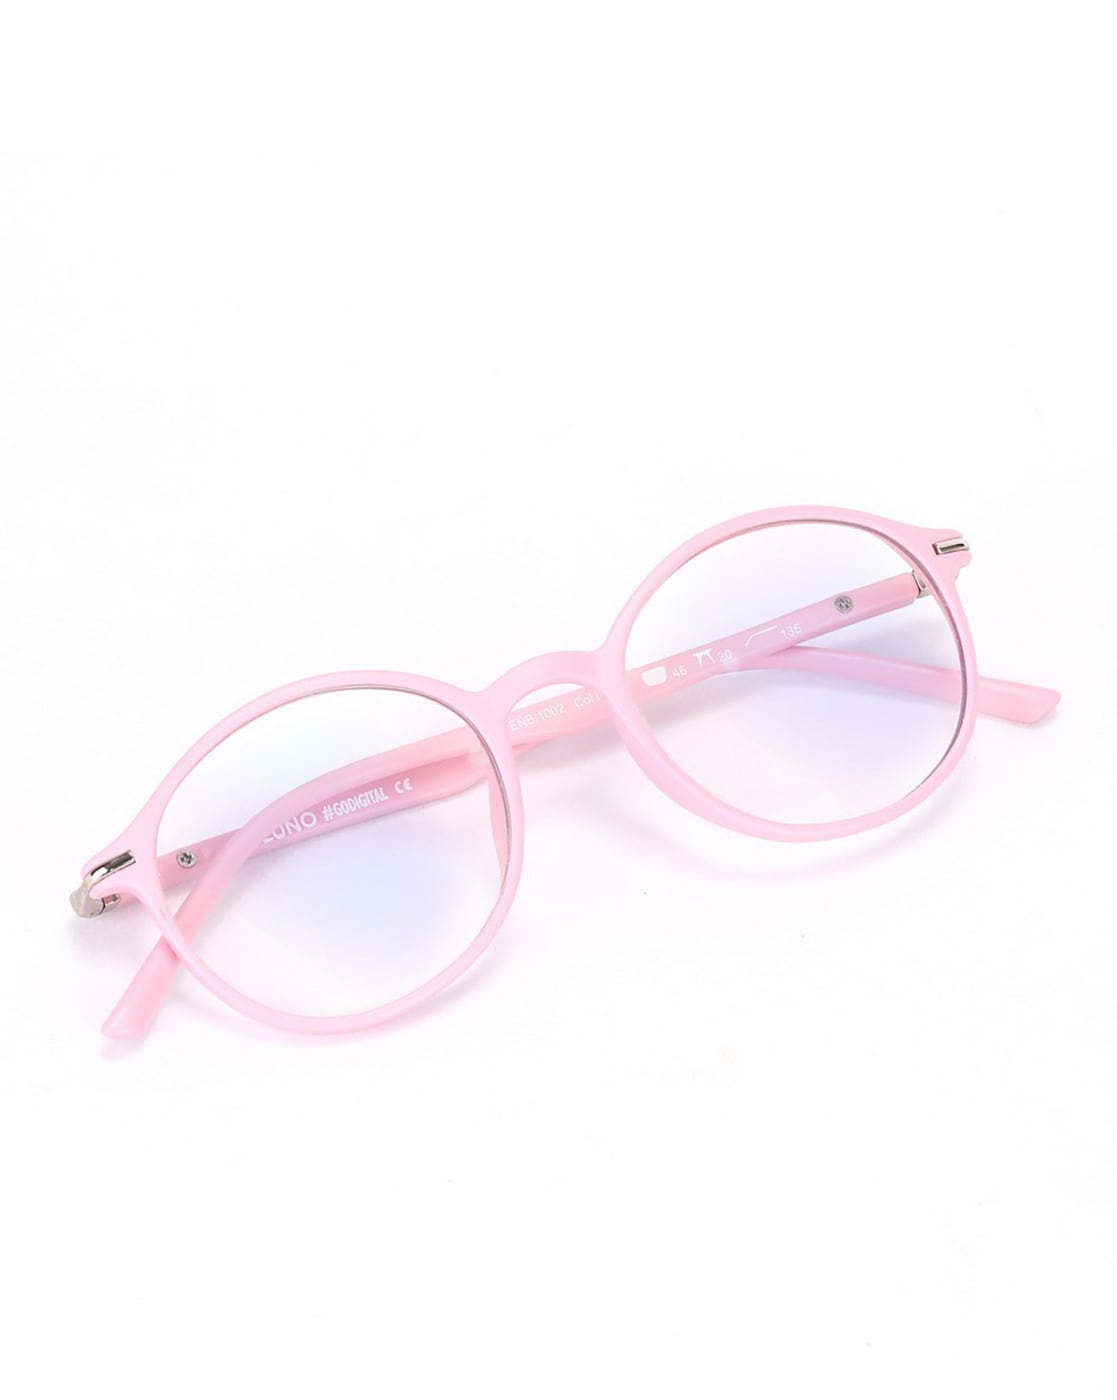 Buy Pink Spectacles for Men by Enrico Online